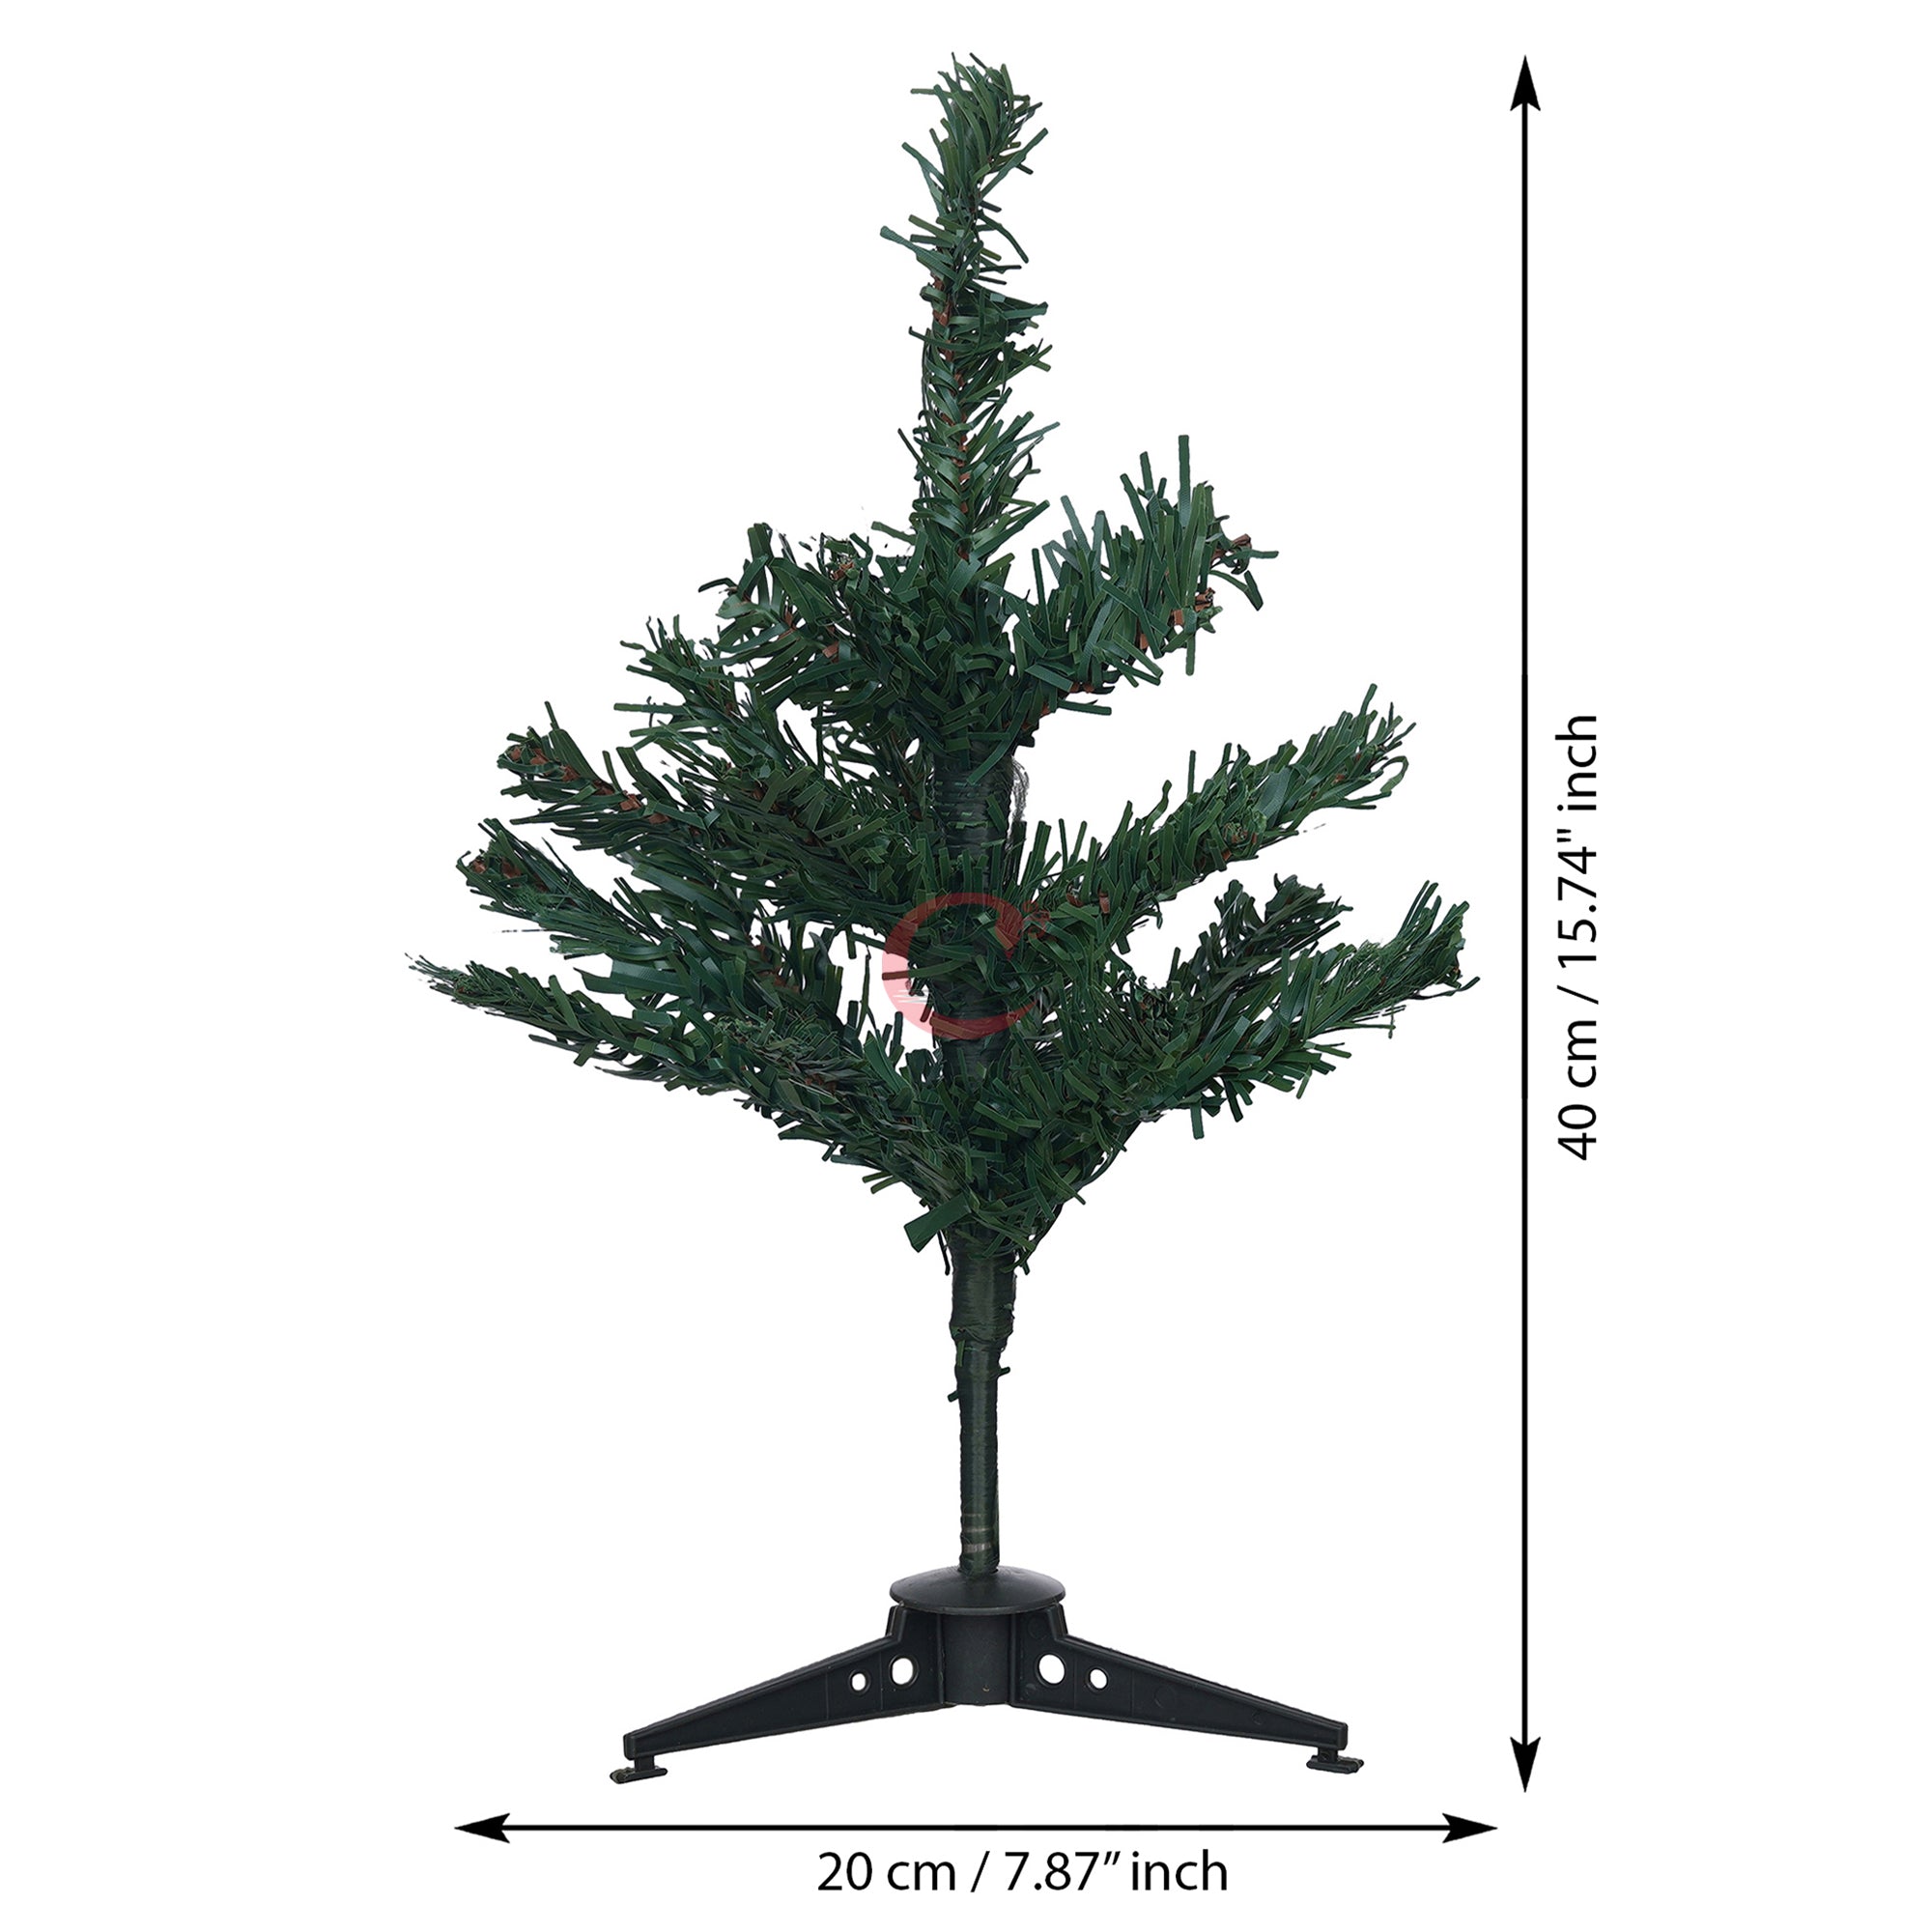 eCraftIndia 1 Feet Green Artificial Christmas Tree Xmas Pine Tree with Metal Stand - Xmas Tree for Indoor, Outdoor, Home, Living Room, Office, Church Decor - Merry Christmas Decoration Item 3